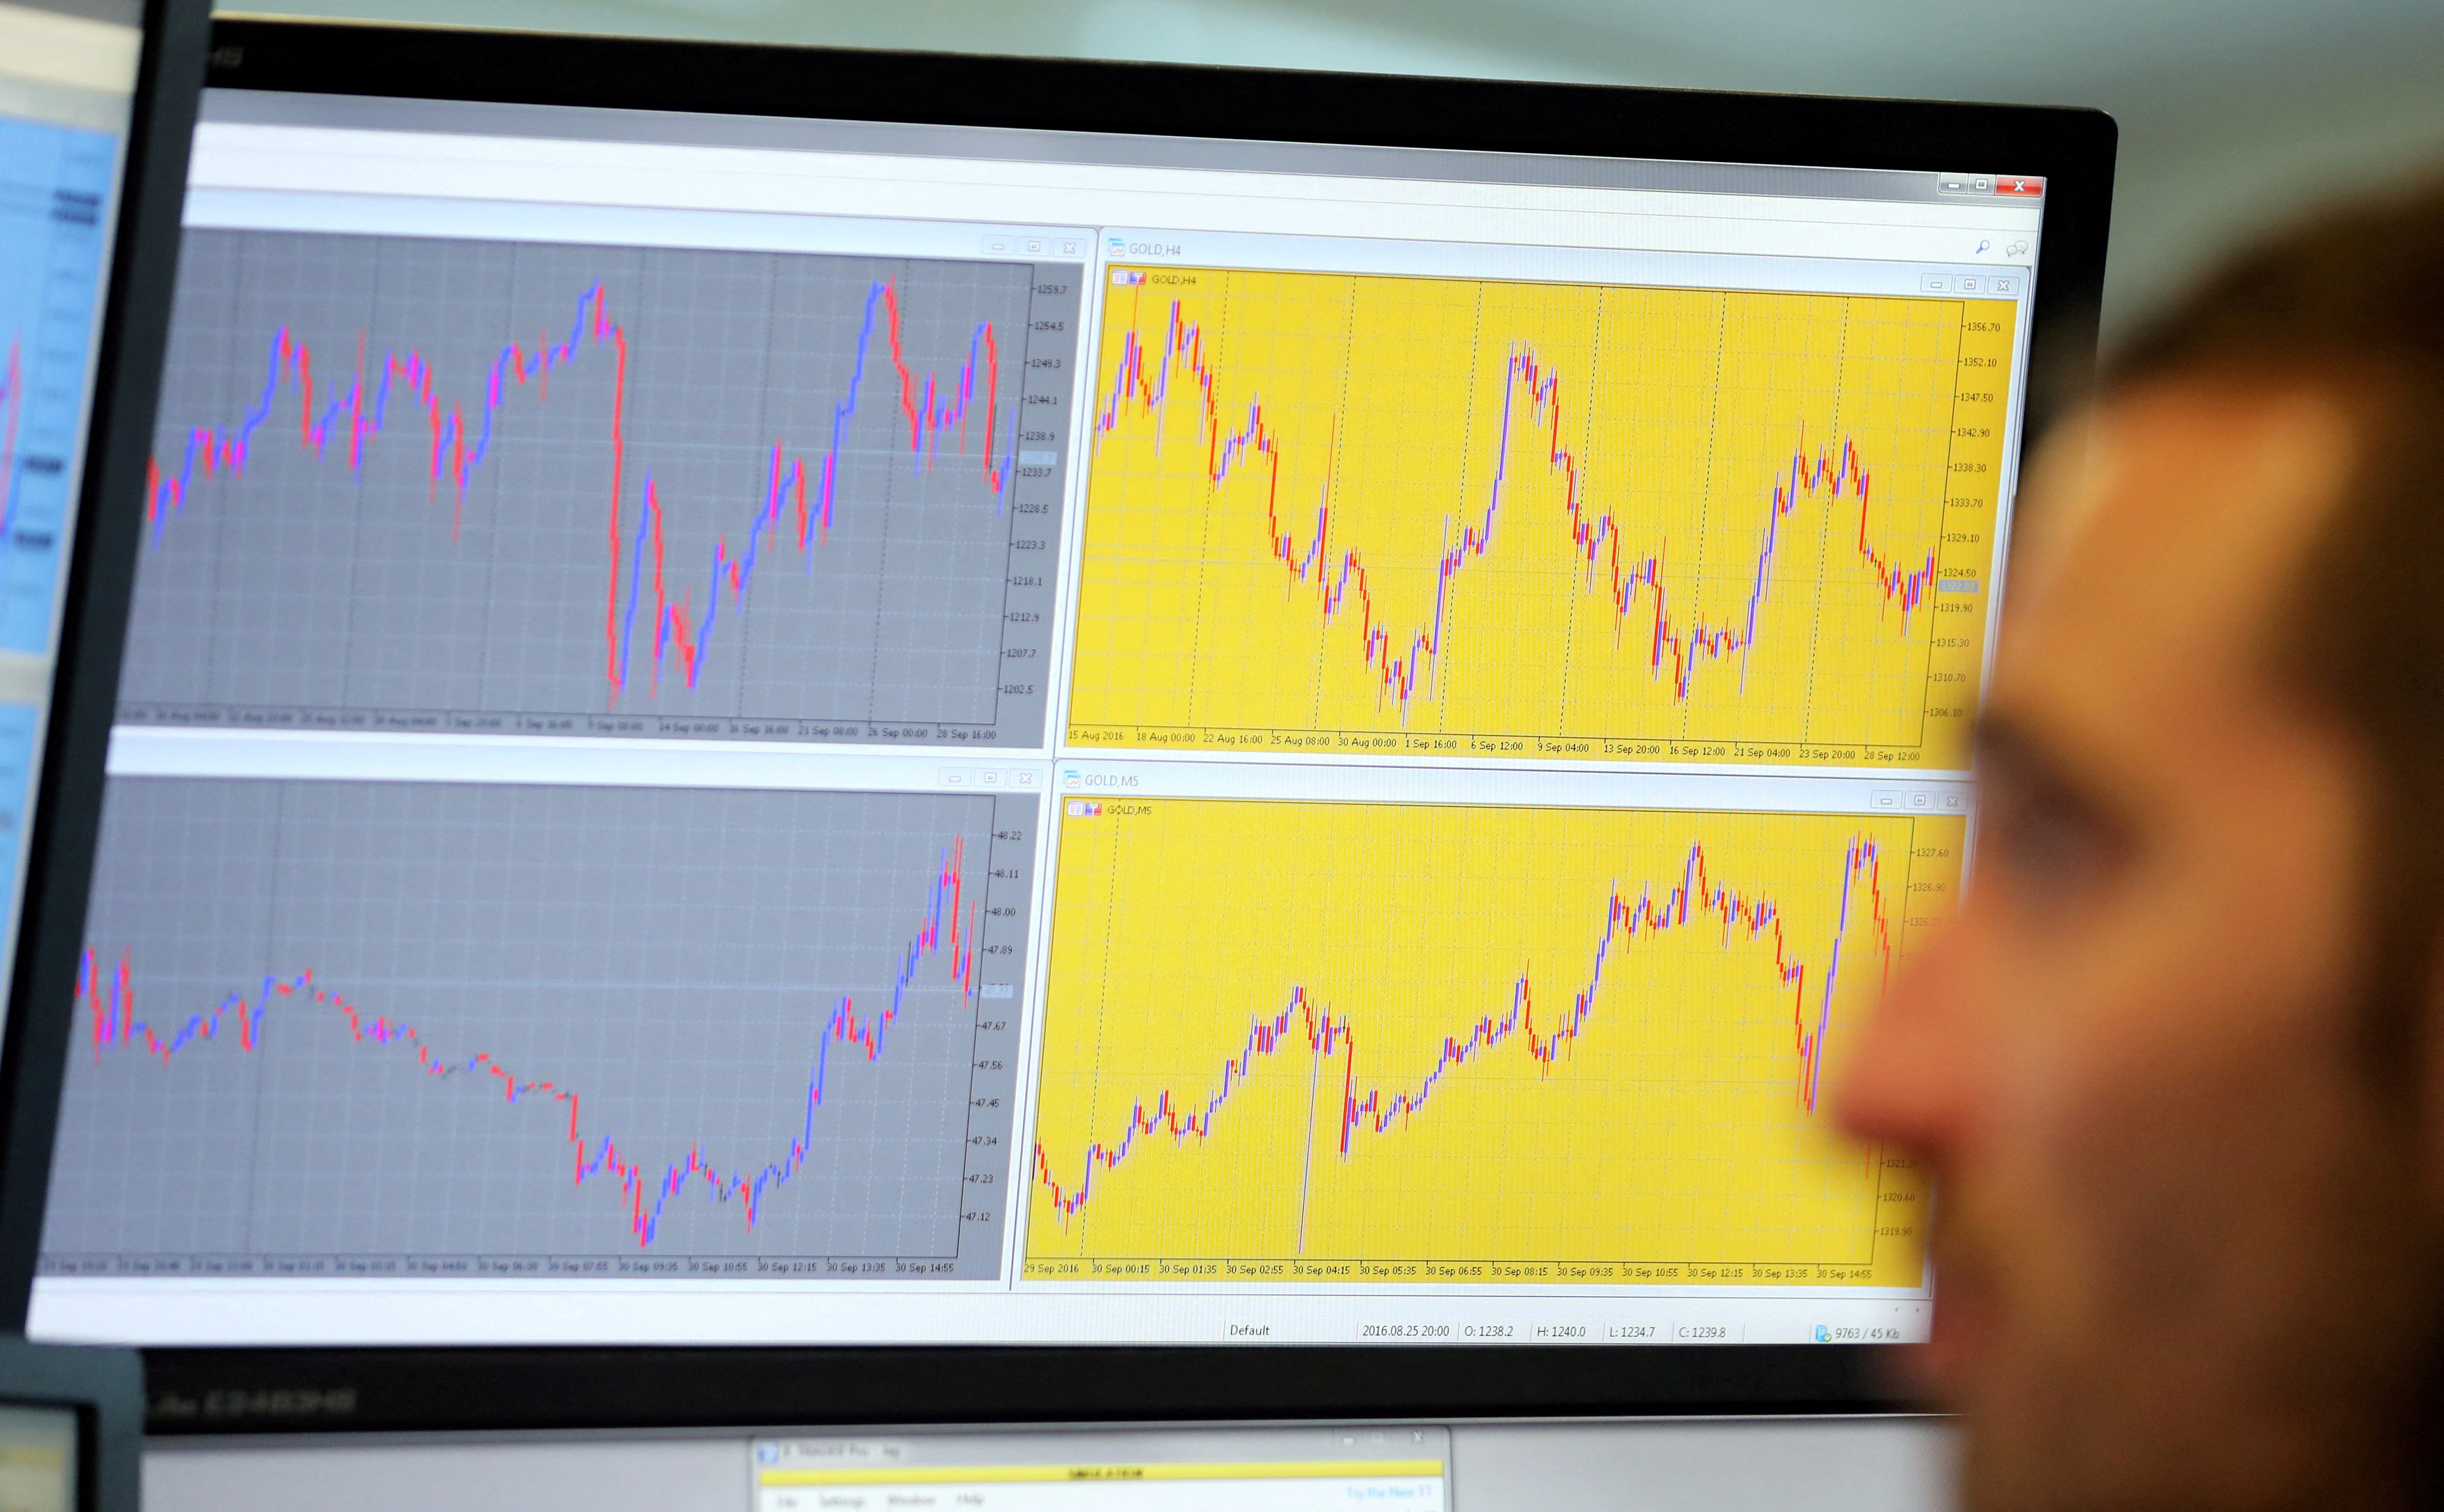 A trader looks at screens with graphs and tables at the Diamond trading academy in Nice